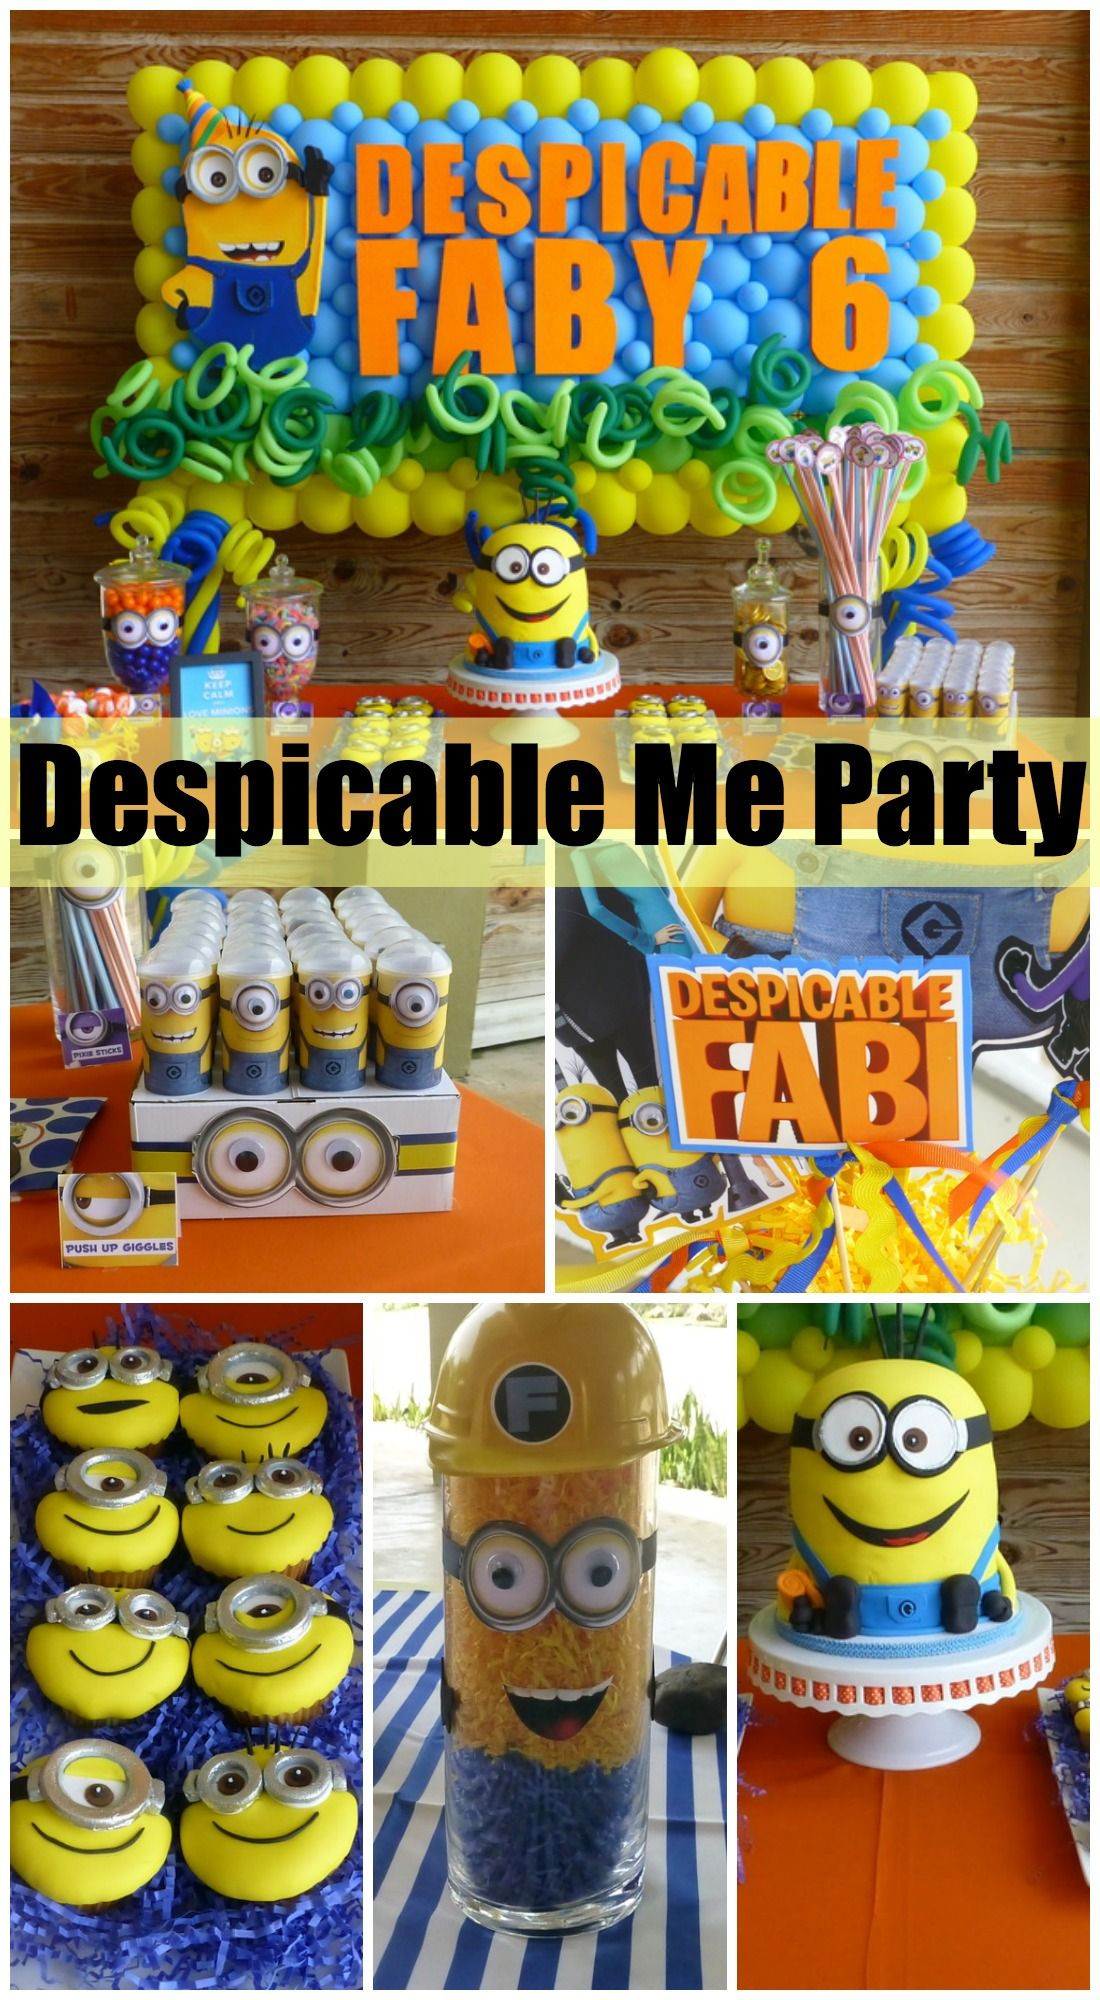 Despicable Me Birthday Party Supplies
 Amazing Despicable Me birthday party ideas especially the